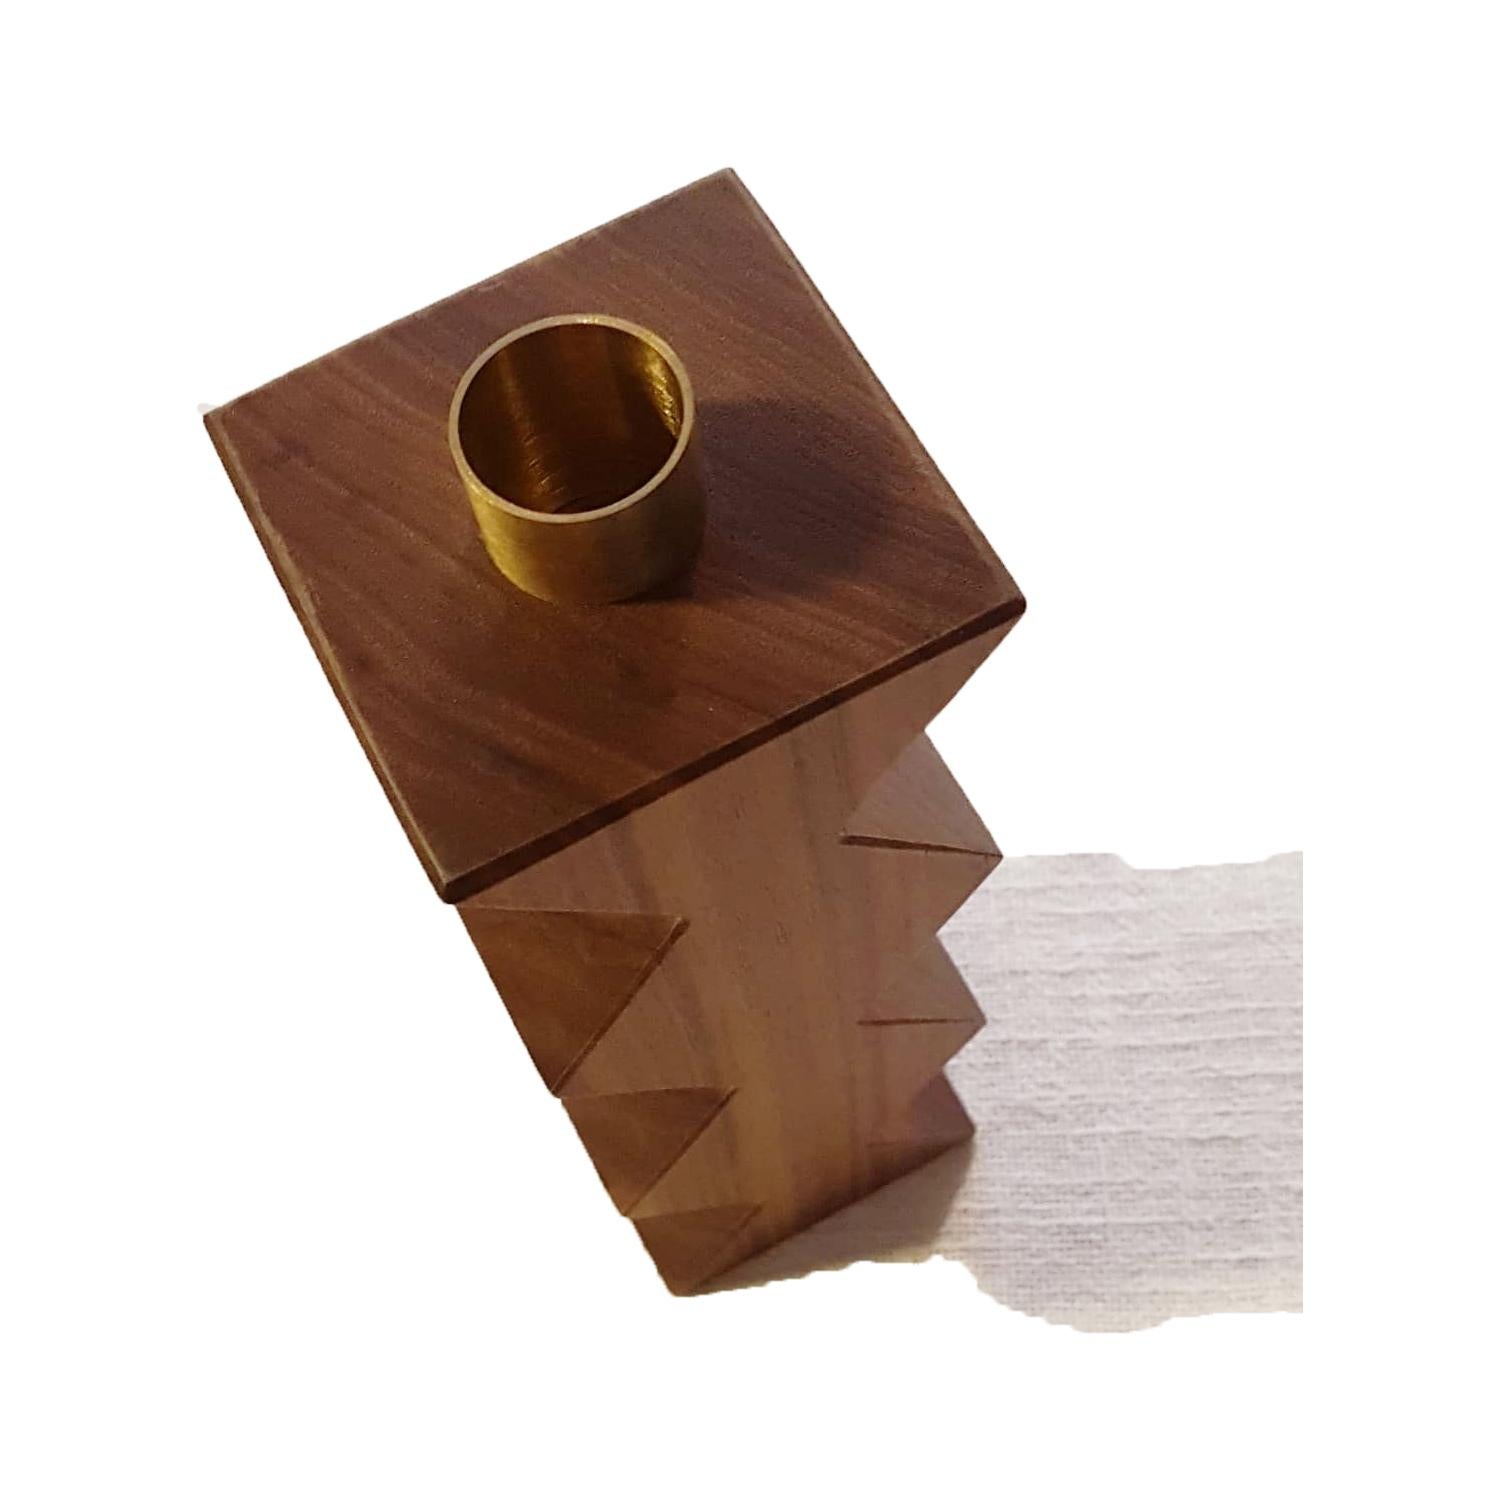 Constantin III is a simple but charming candleholder with a geometric shape with rhombus. The body is in solid Canaletto walnut with natural finishing, emphasizing the wooden veins. The cylinder in natural brass on the top is the place where to put